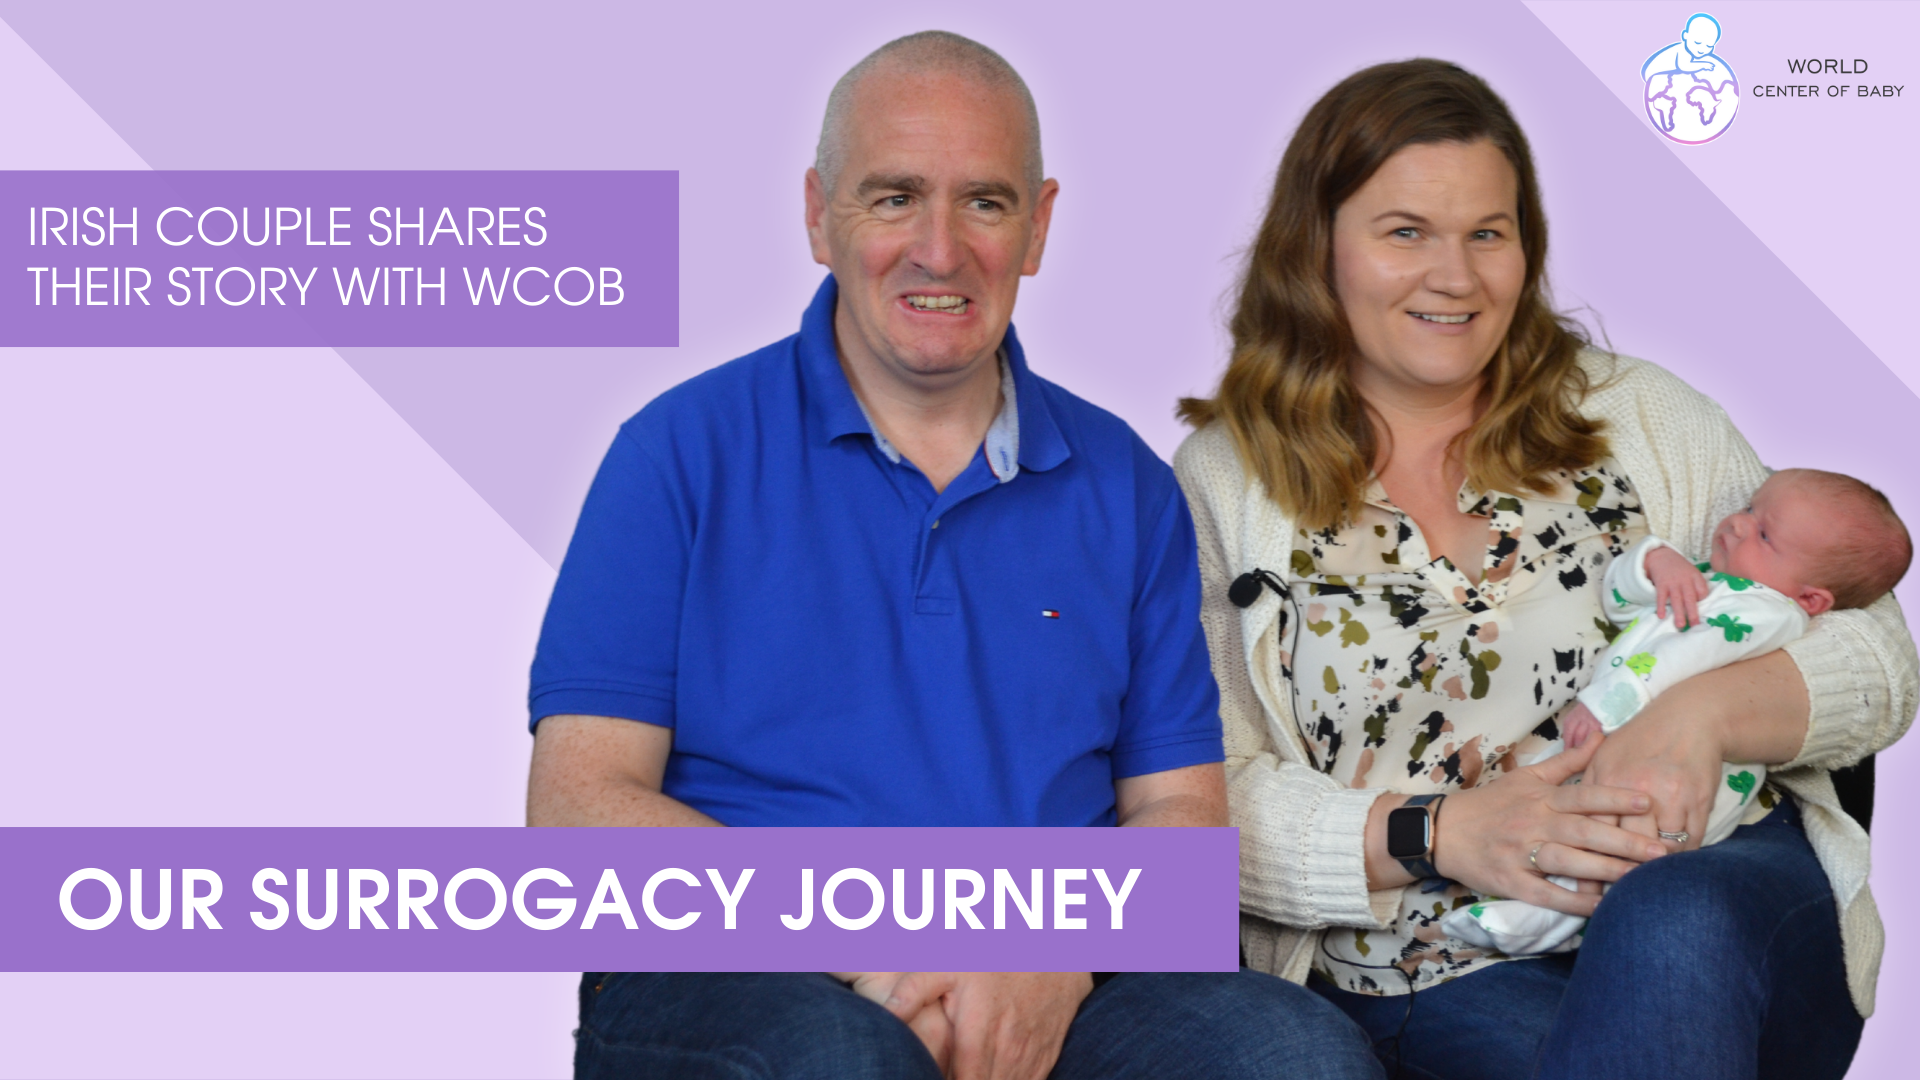 Our Surrogacy Journey — Irish Couple Shares Their Story With World Center of Baby